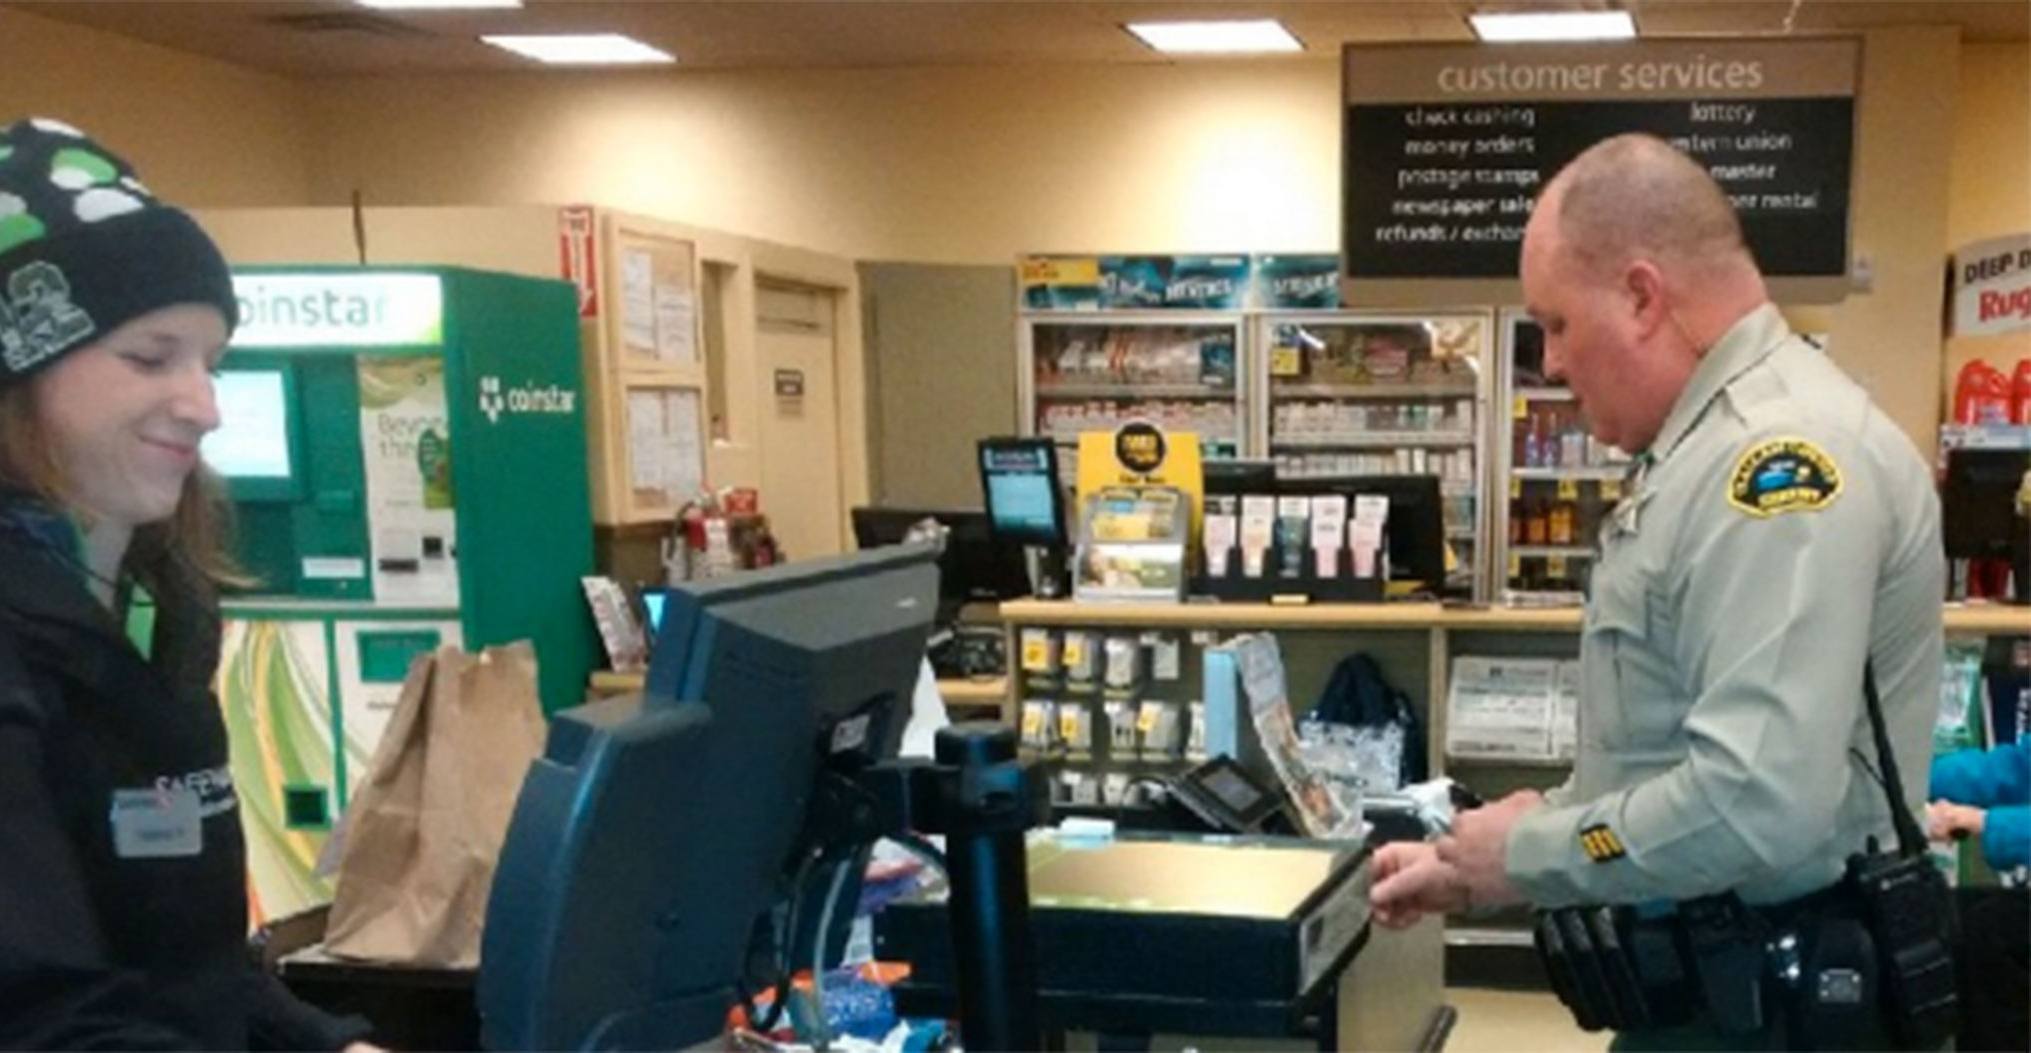 Clallam County Sheriff’s Deputy Don Kitchen buys some groceries for an Army veteran after encountering the man during an “erratic driver” call in the Sequim area.                                Photo courtesy Clallam County Sheriff’s Office